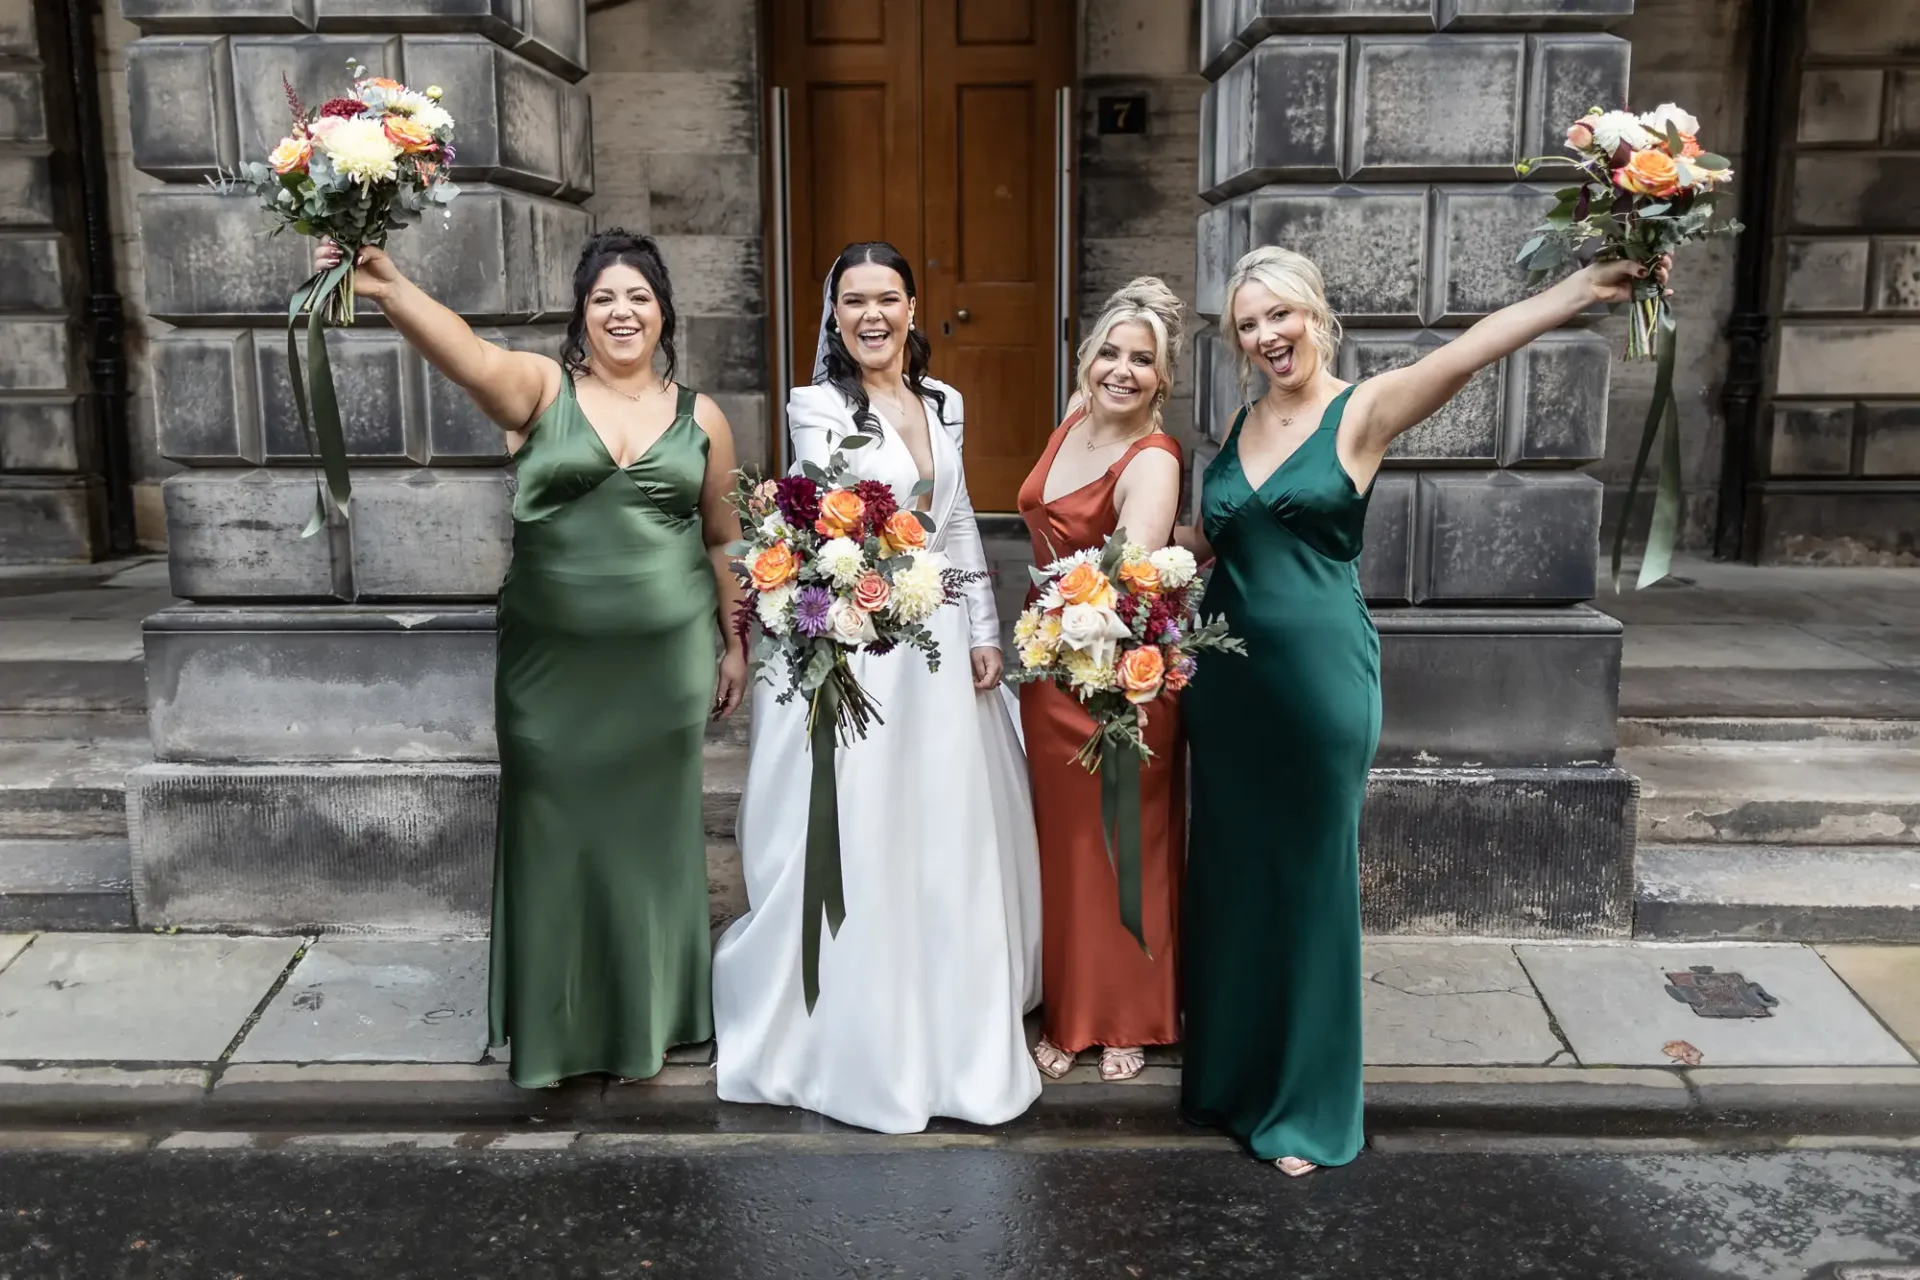 Four women in elegant dresses, holding bouquets, joyfully posing outside a stone building. two wear green and two in white and rust.